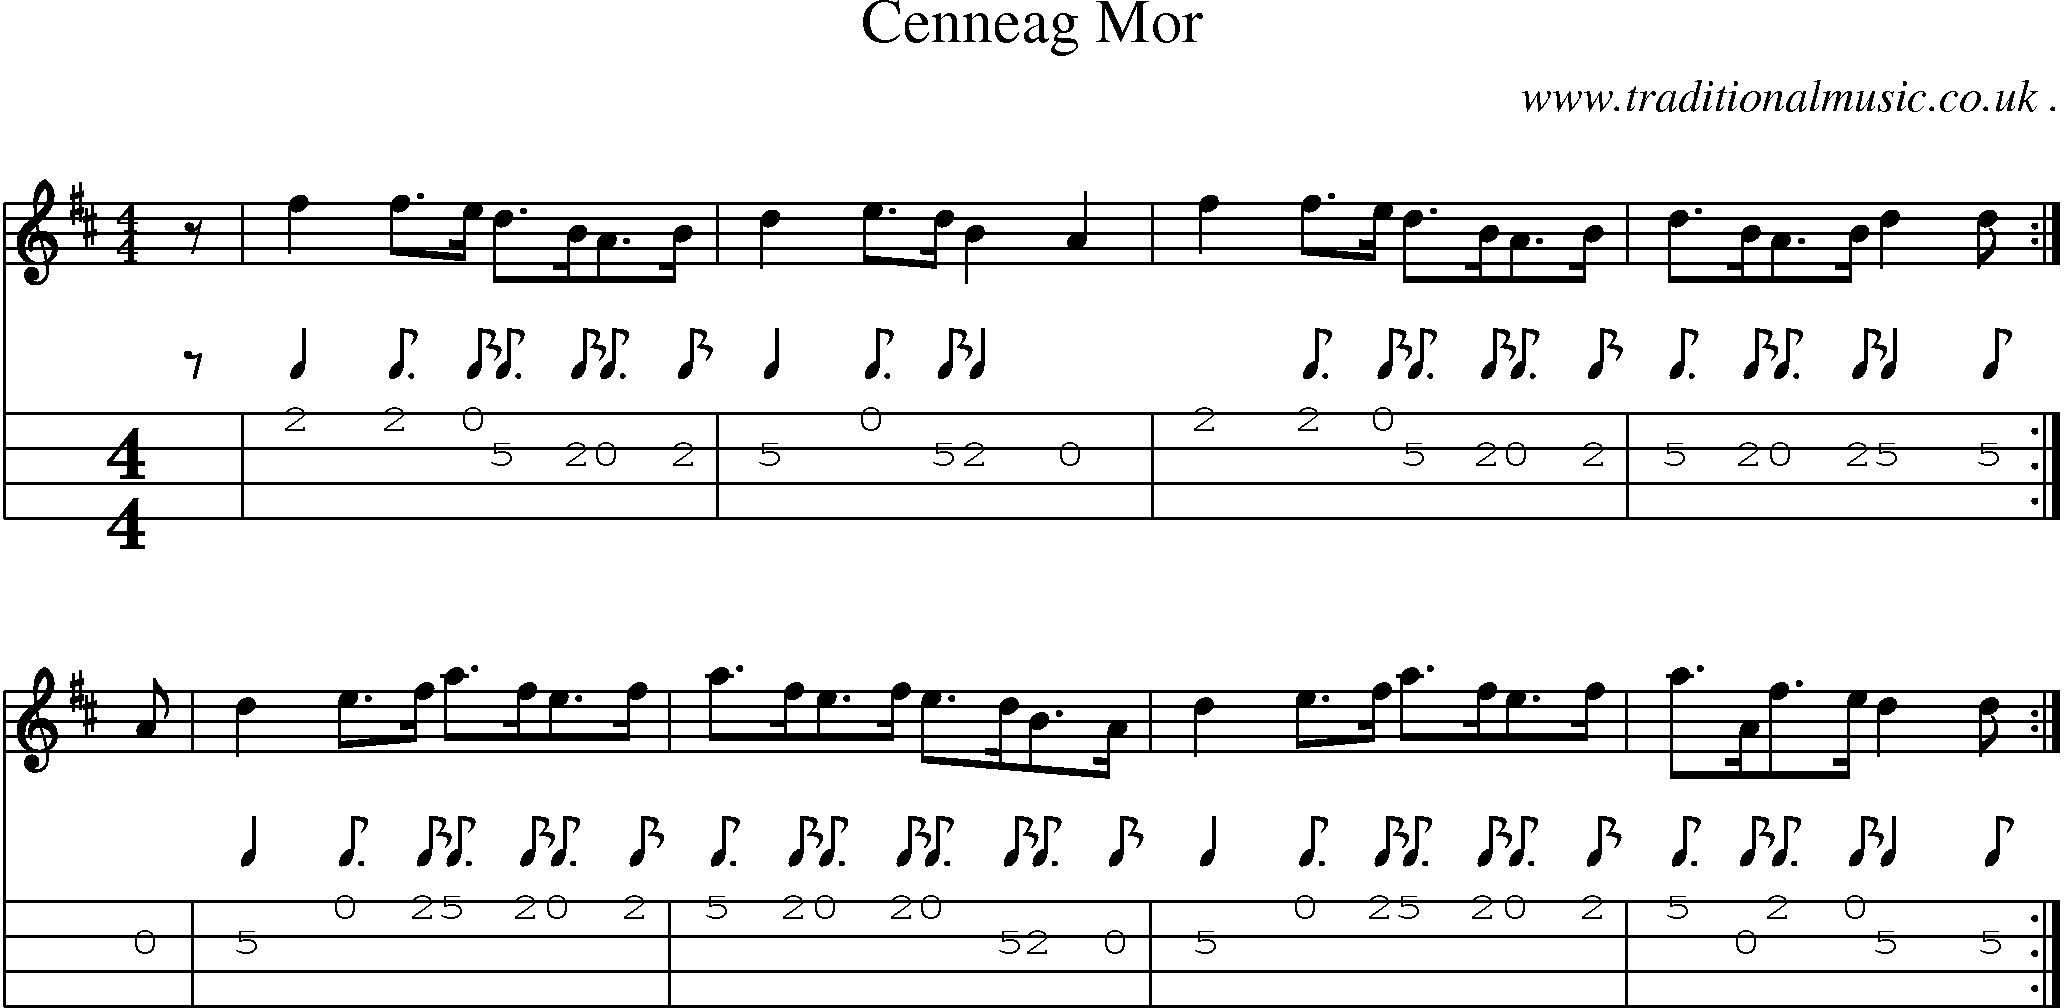 Sheet-music  score, Chords and Mandolin Tabs for Cenneag Mor